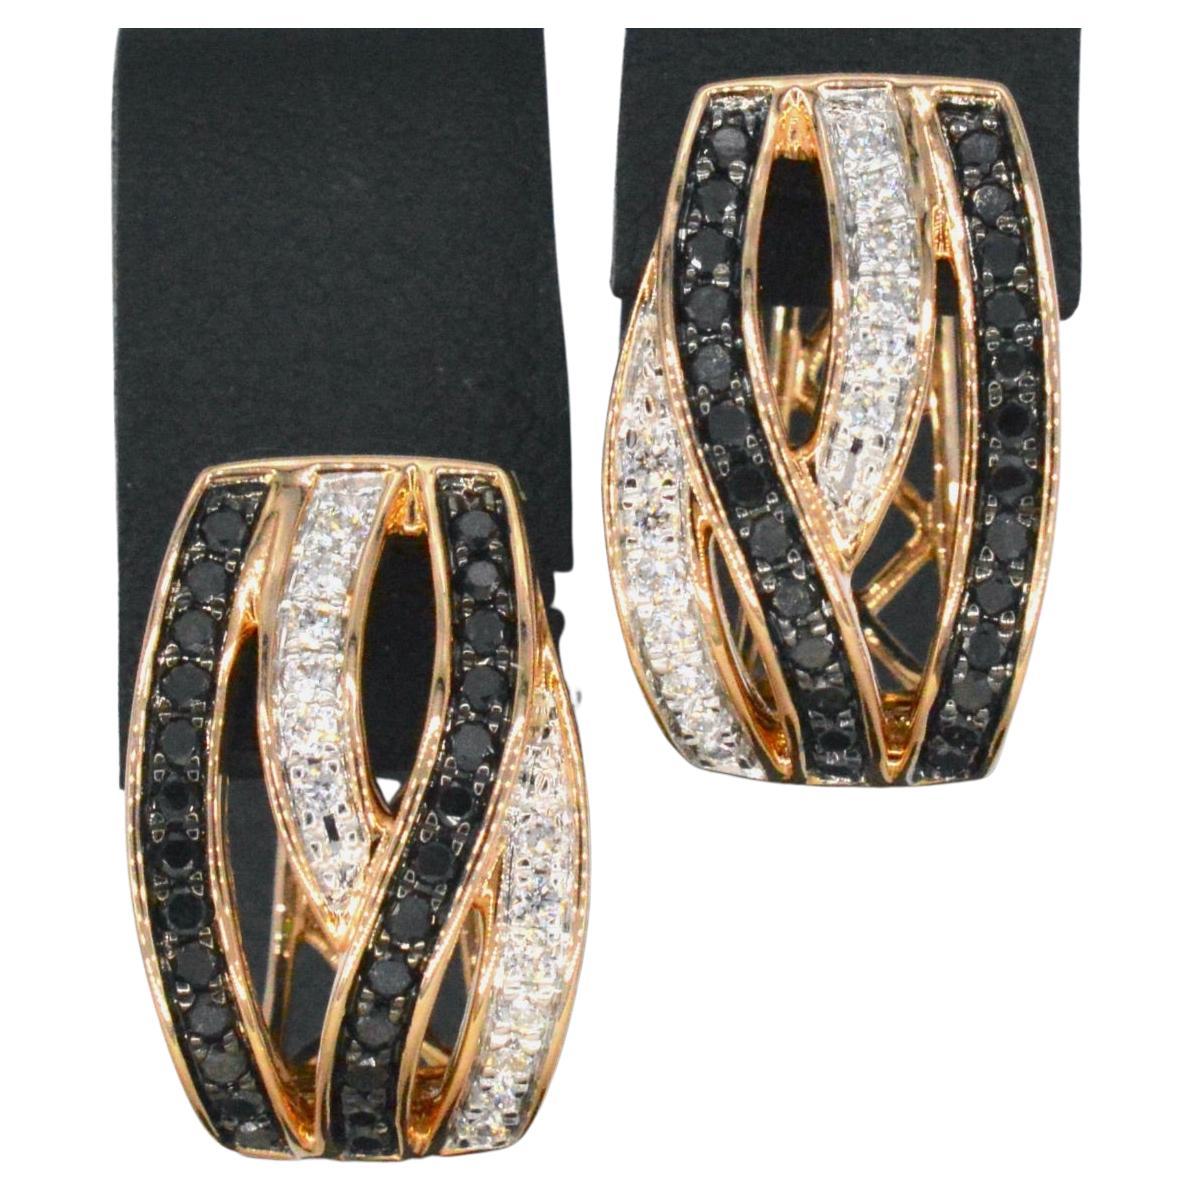 Rose Gold Design Earrings with White and Black Brilliant Diamonds